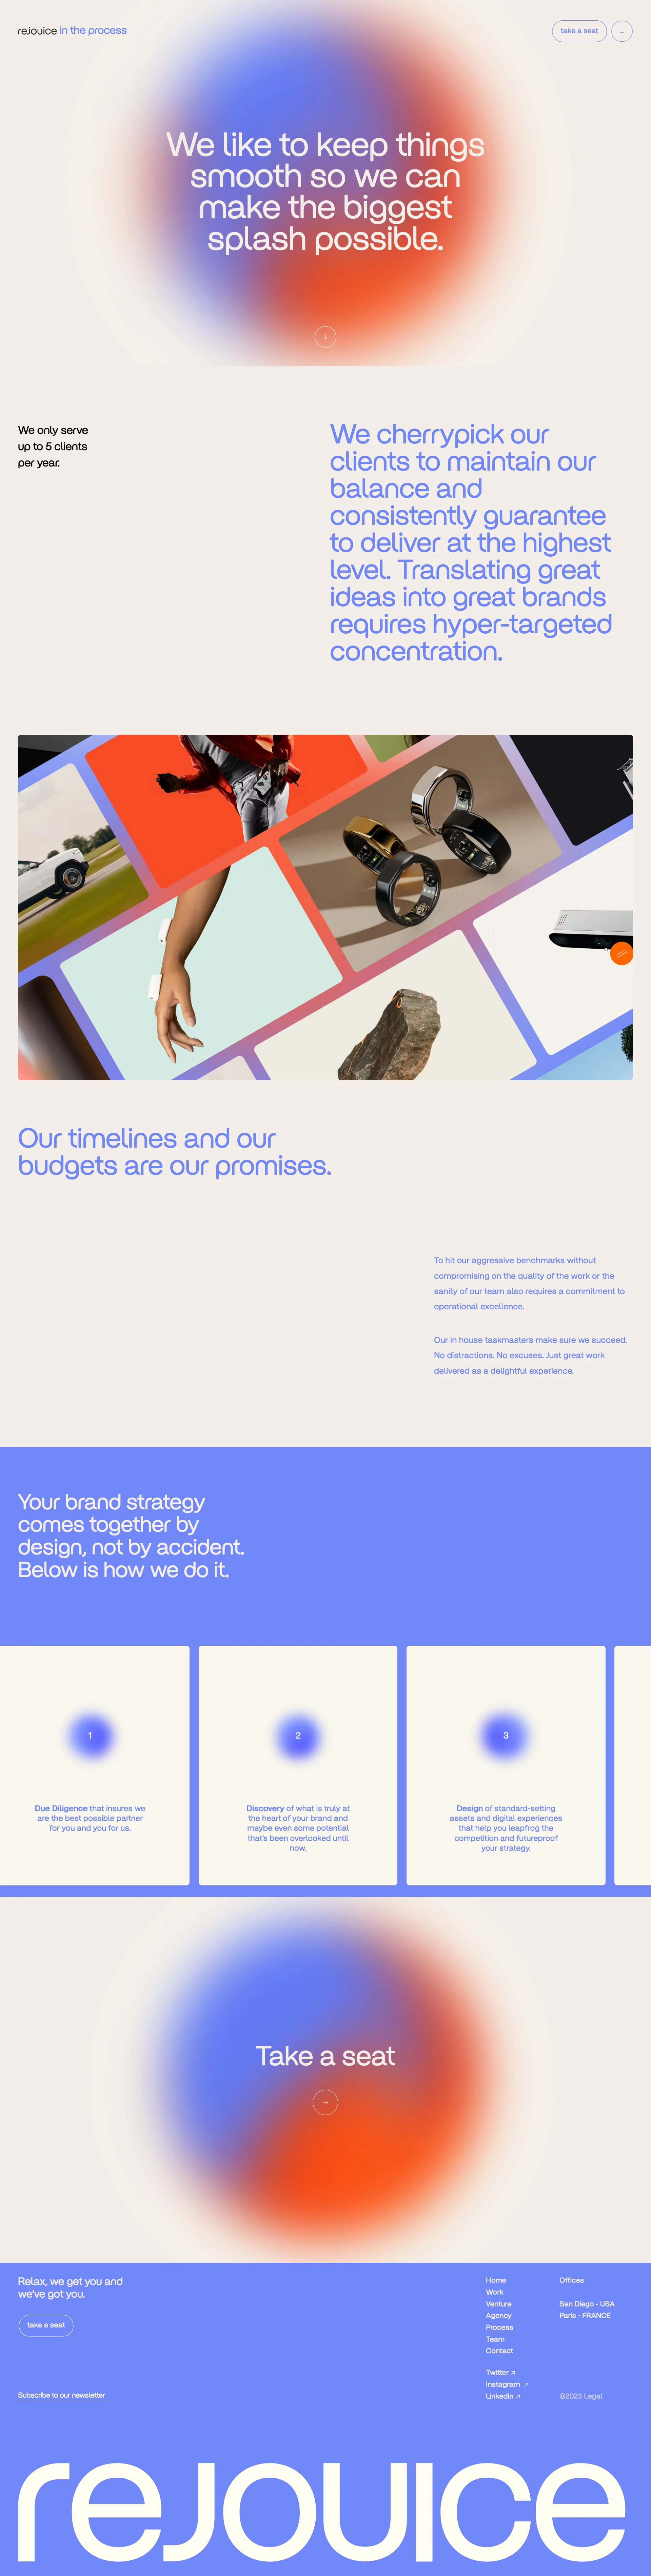 REJOUICE Landing Page Example: We are equal parts digital agency and venture firm. We elevate game-changing brands for growth by translating their future potential into a strategic brand narrative and authentic digital presence.